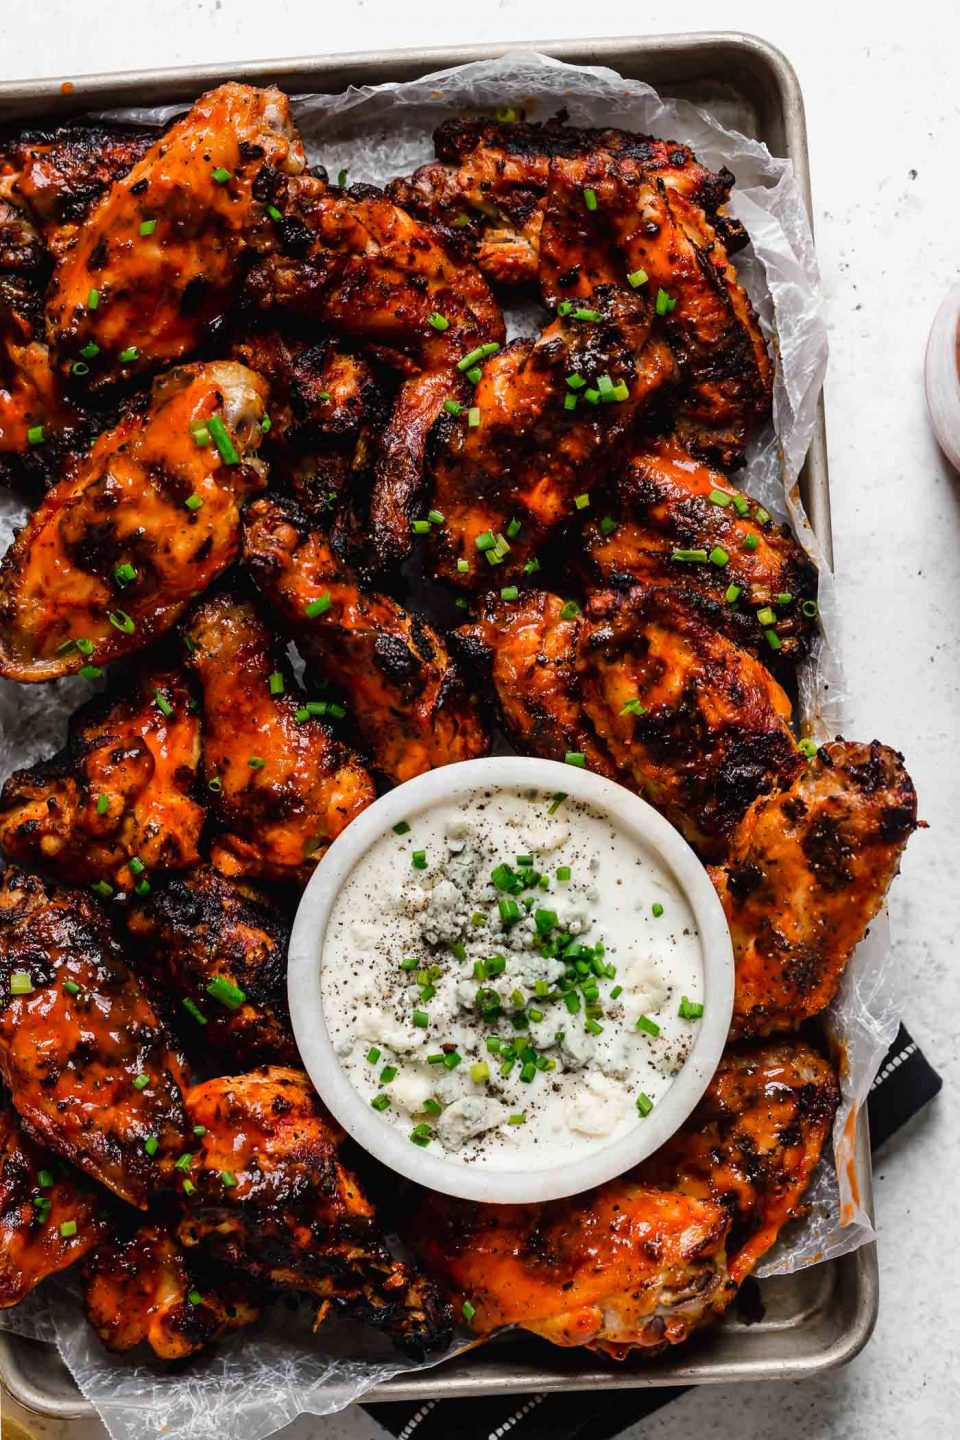 A small baking sheet of grilled chicken wings, & are topped generously with snipped chives. The tray sits atop a black & white striped linen on a white surface next to a bottle of Frank's RedHot hot sauce.